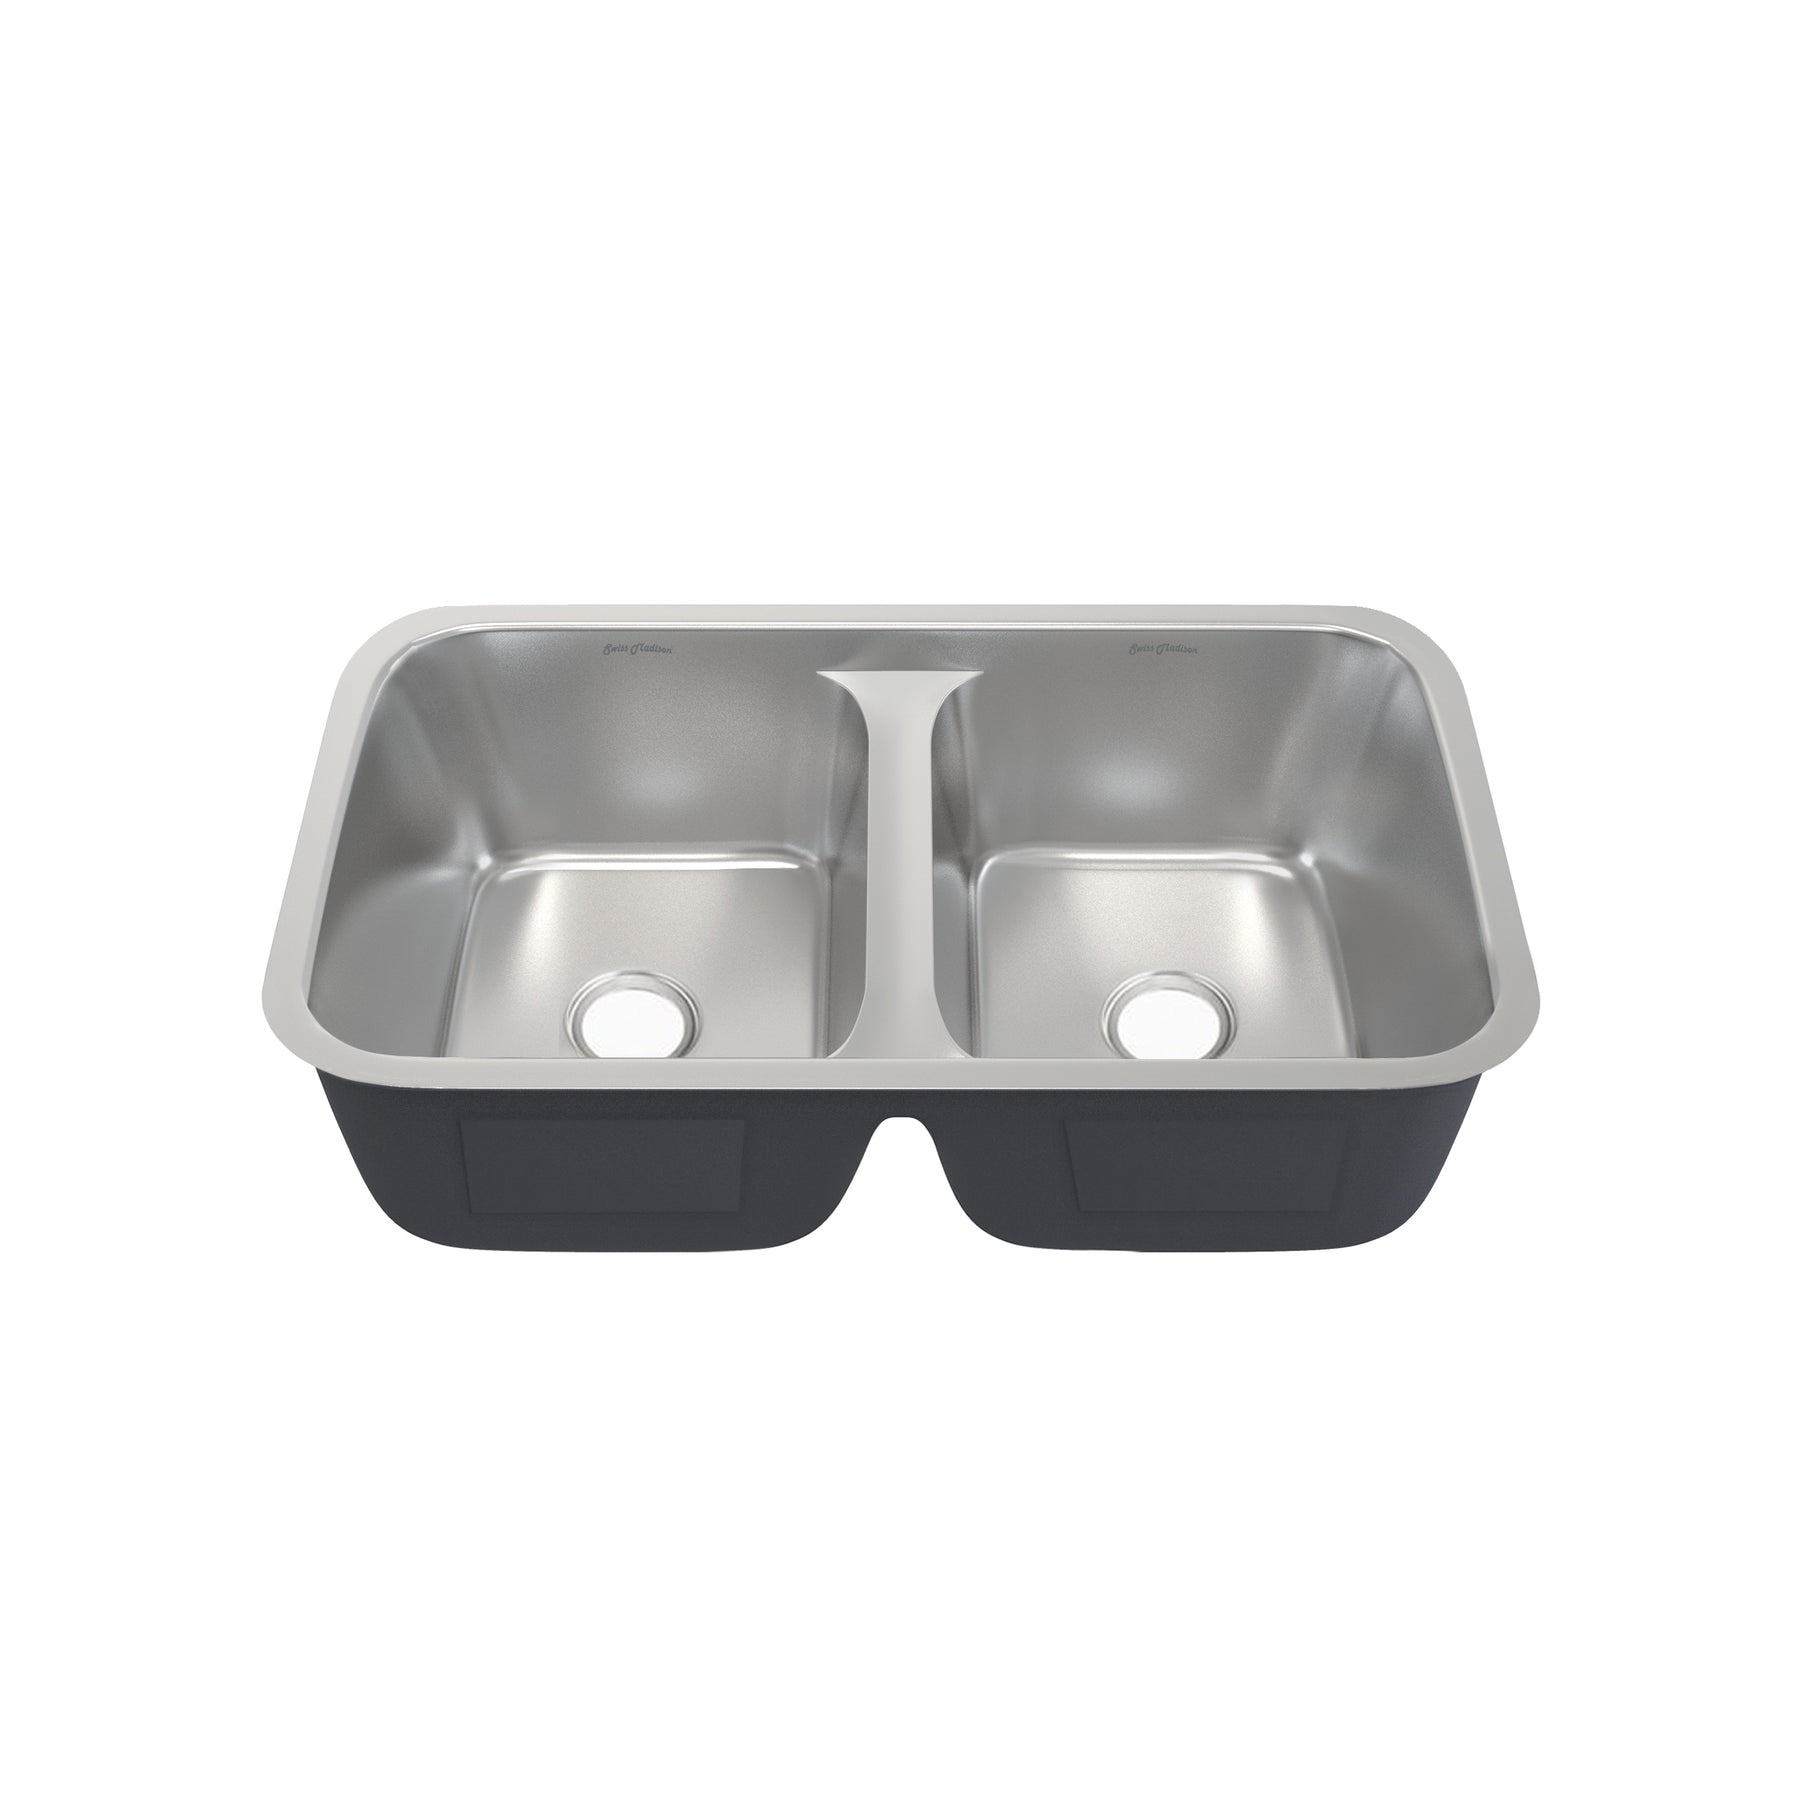 Swiss Madison Toulouse 32 x 19 Low Divide Stainless Steel, Dual Basin, Under-Mount Kitchen Sink - SM-KU631